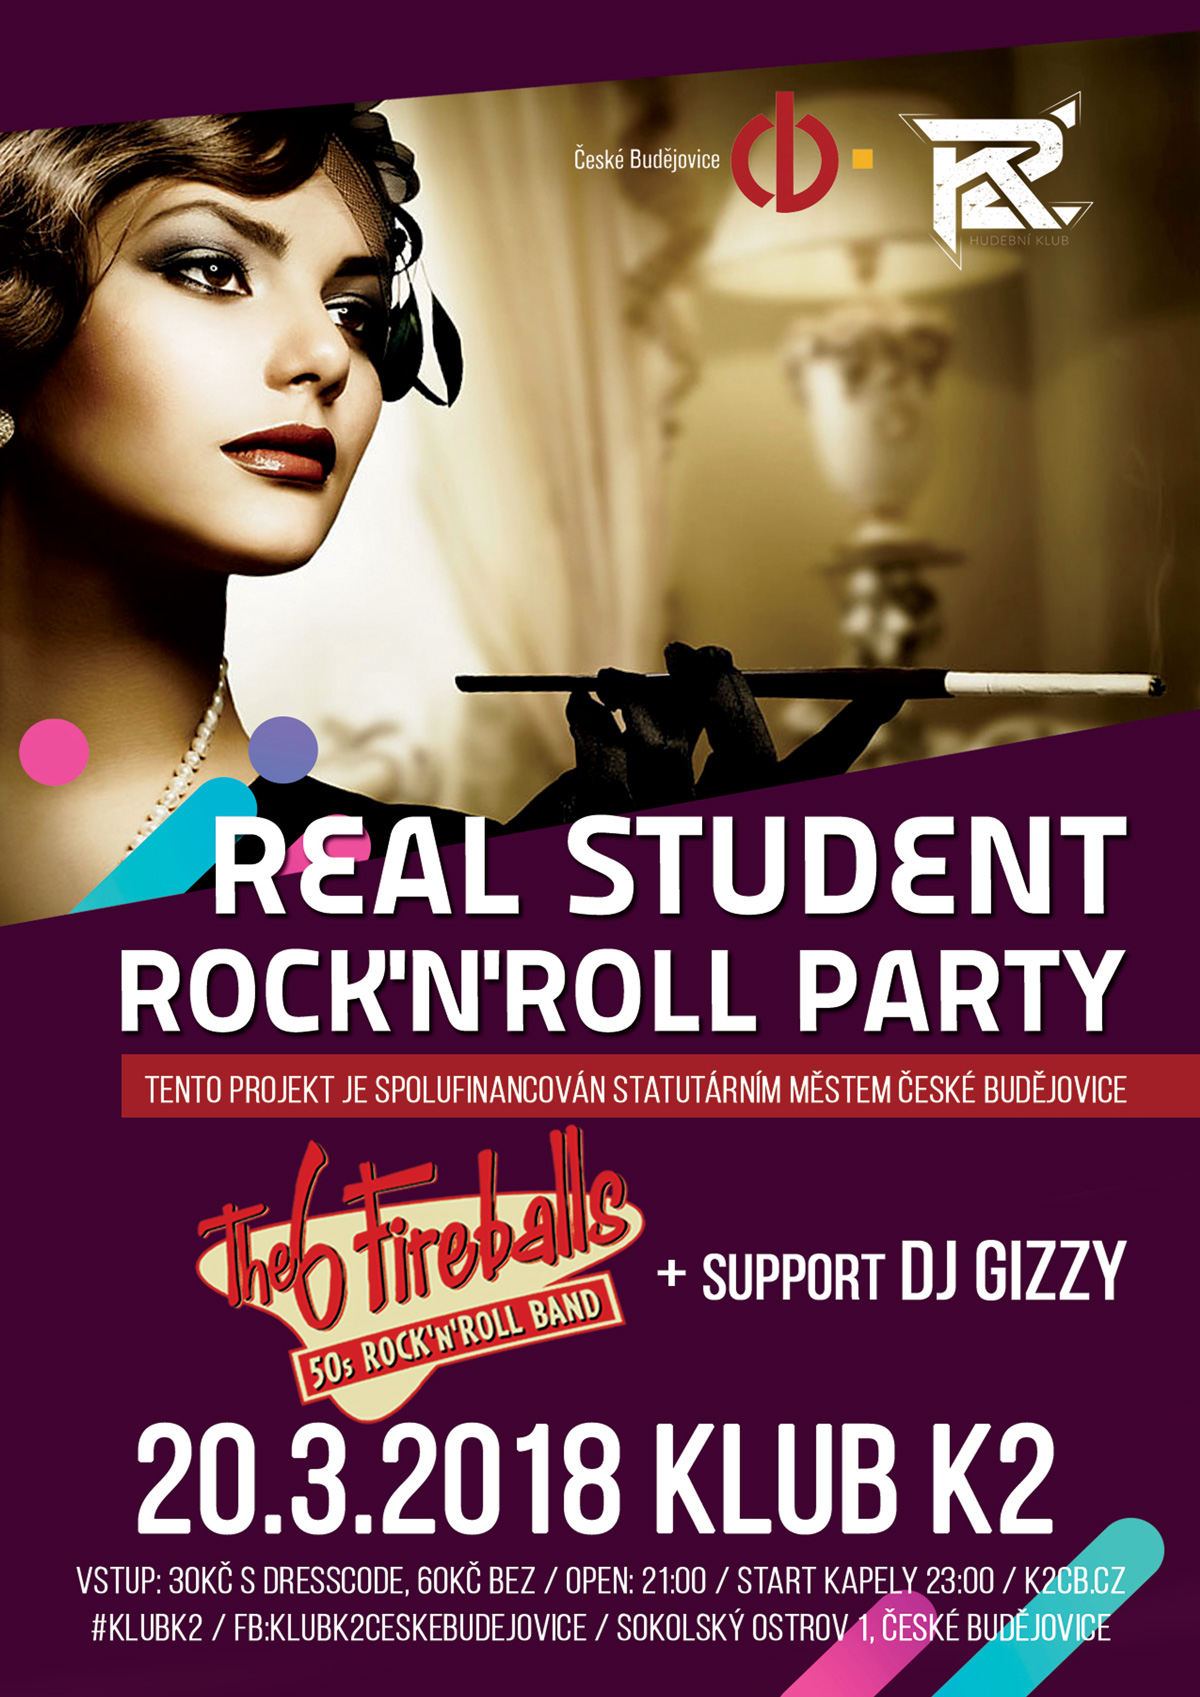 Real student rocknroll party